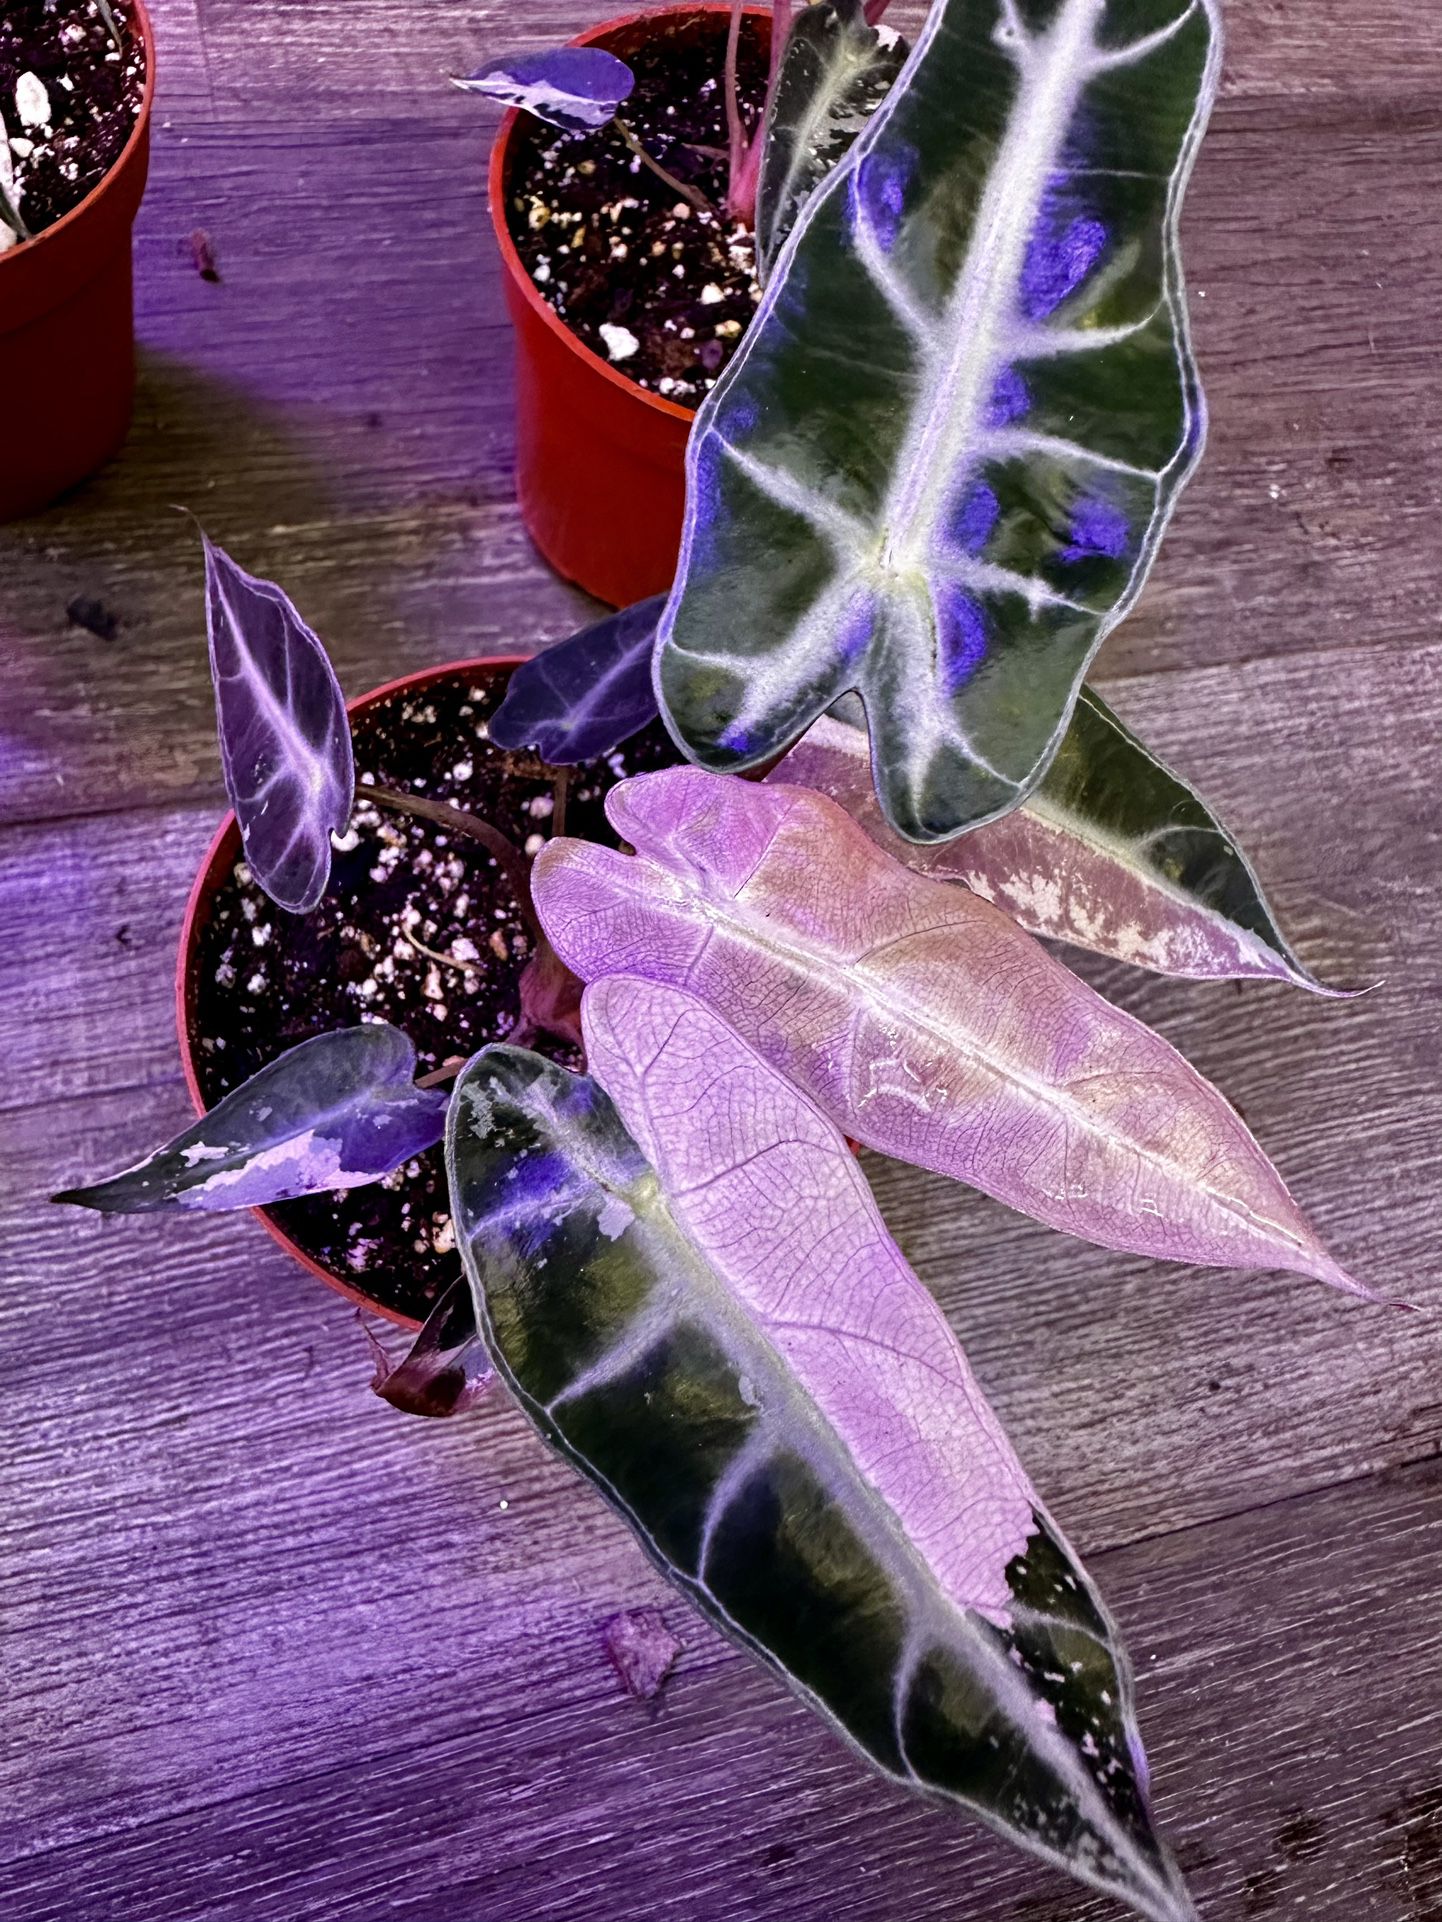 Alocasia Pink Bambino Variegated Plant Rare Indoor Plants 